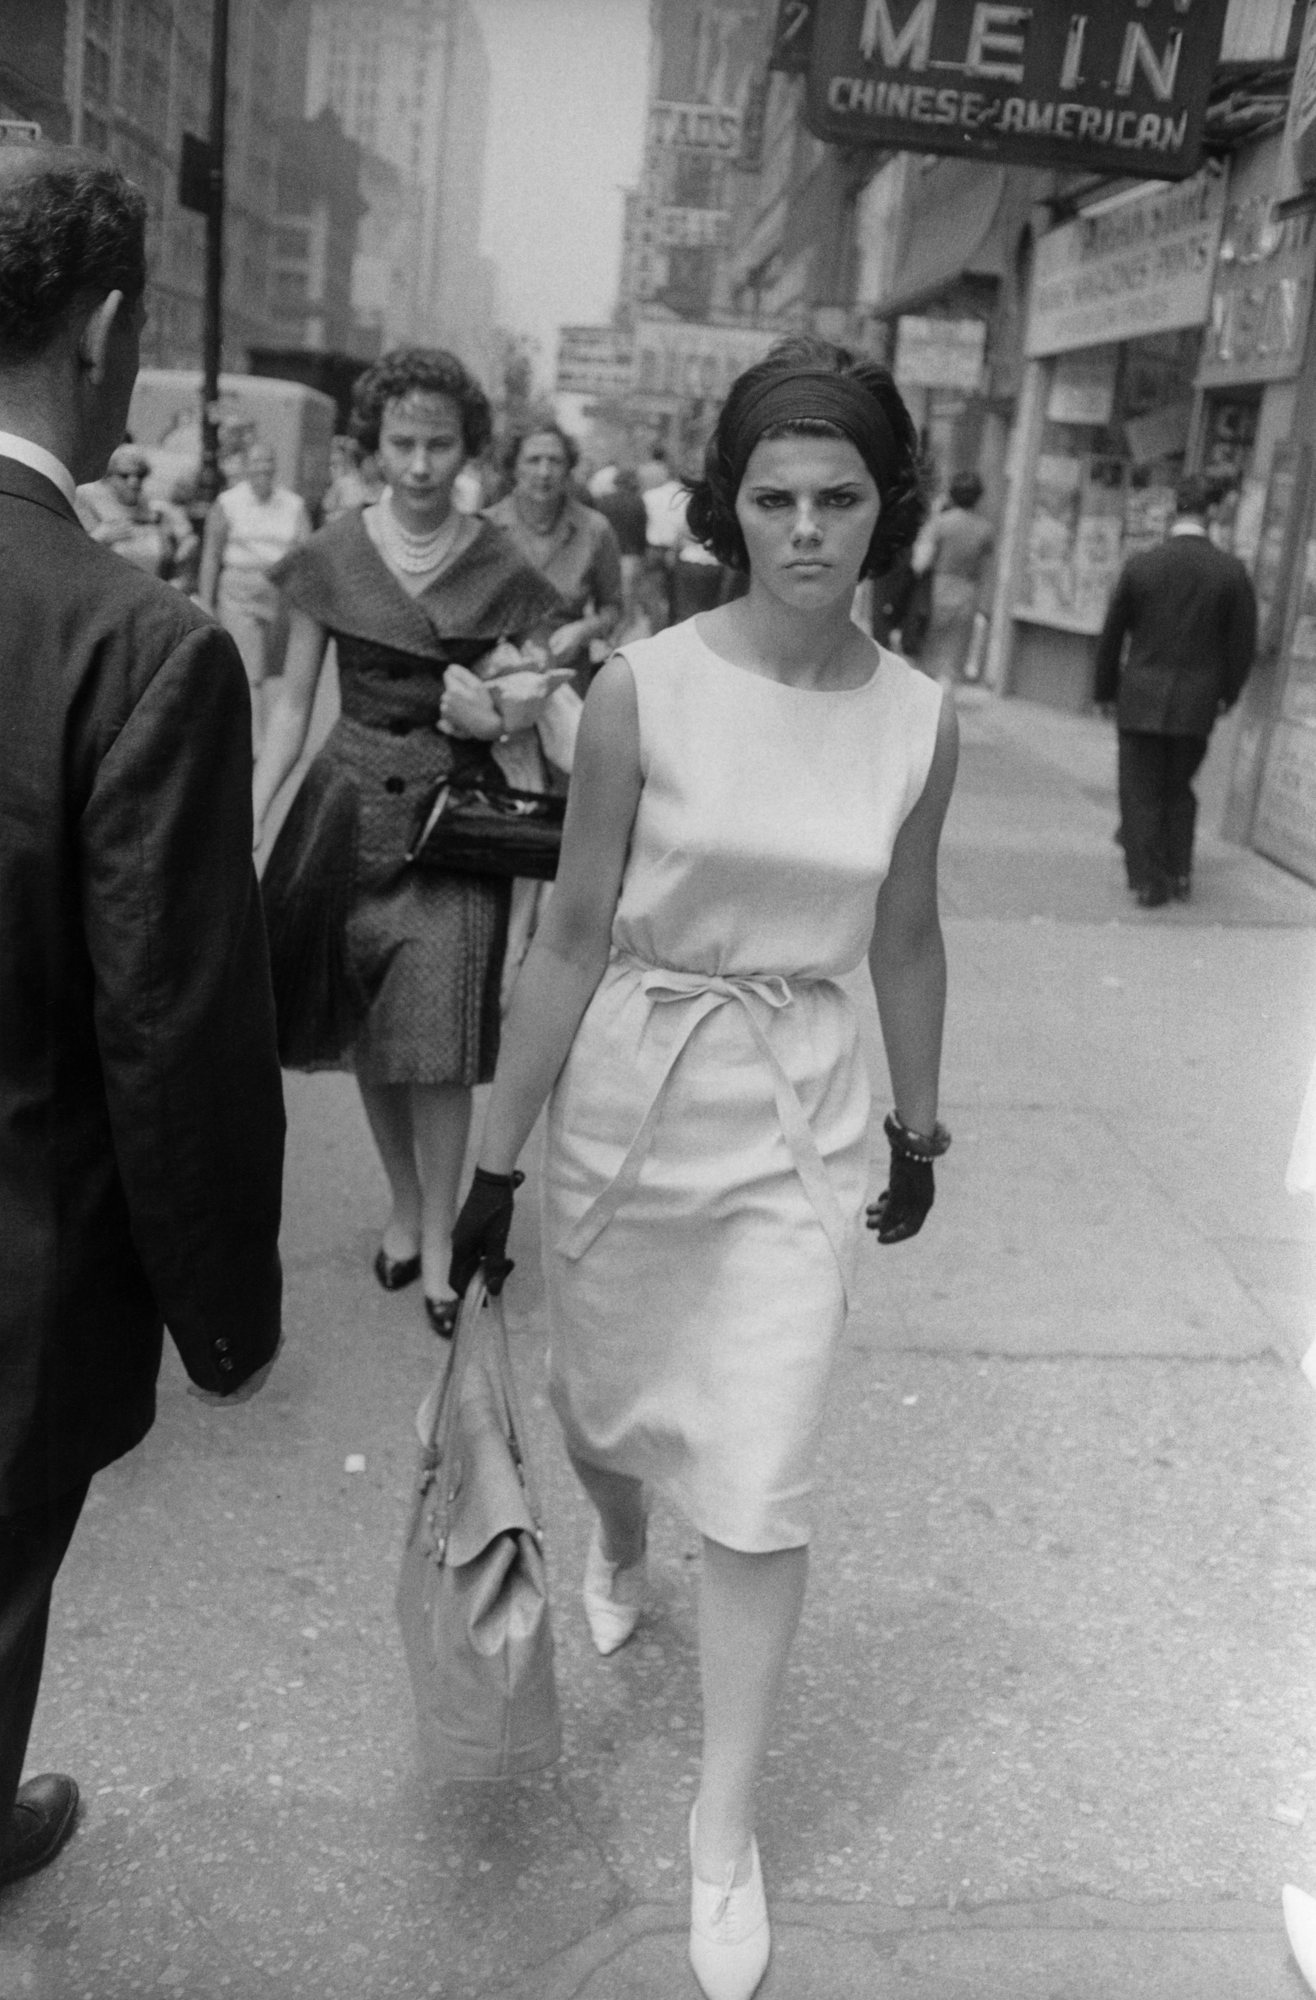 Black and white photograph of a female figure walking on a busy street